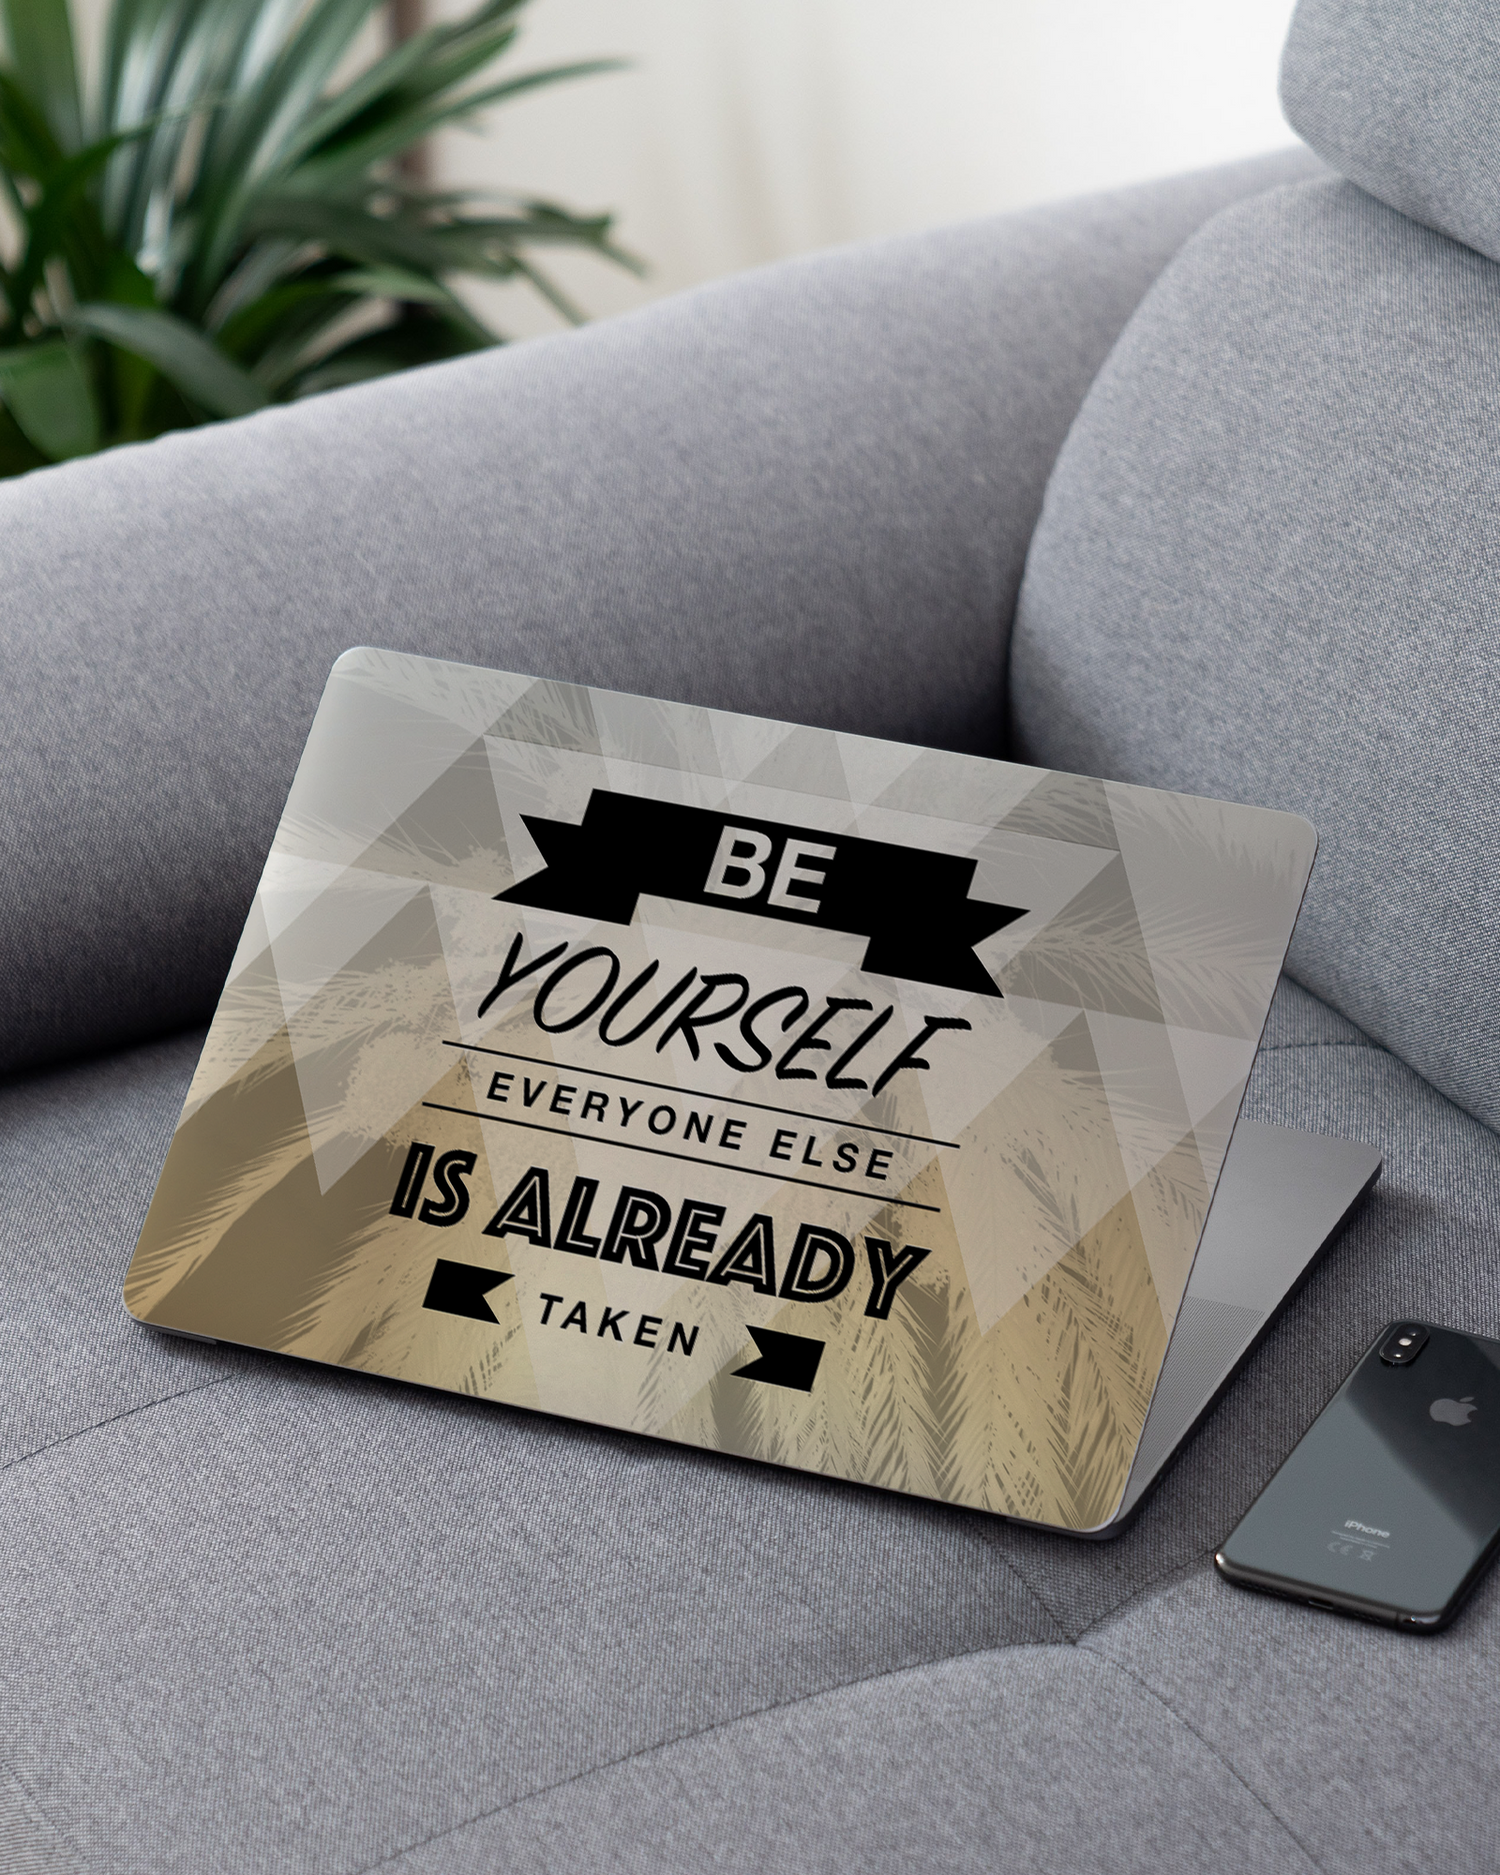 Be Yourself Laptop Skin for 13 inch Apple MacBooks on a couch